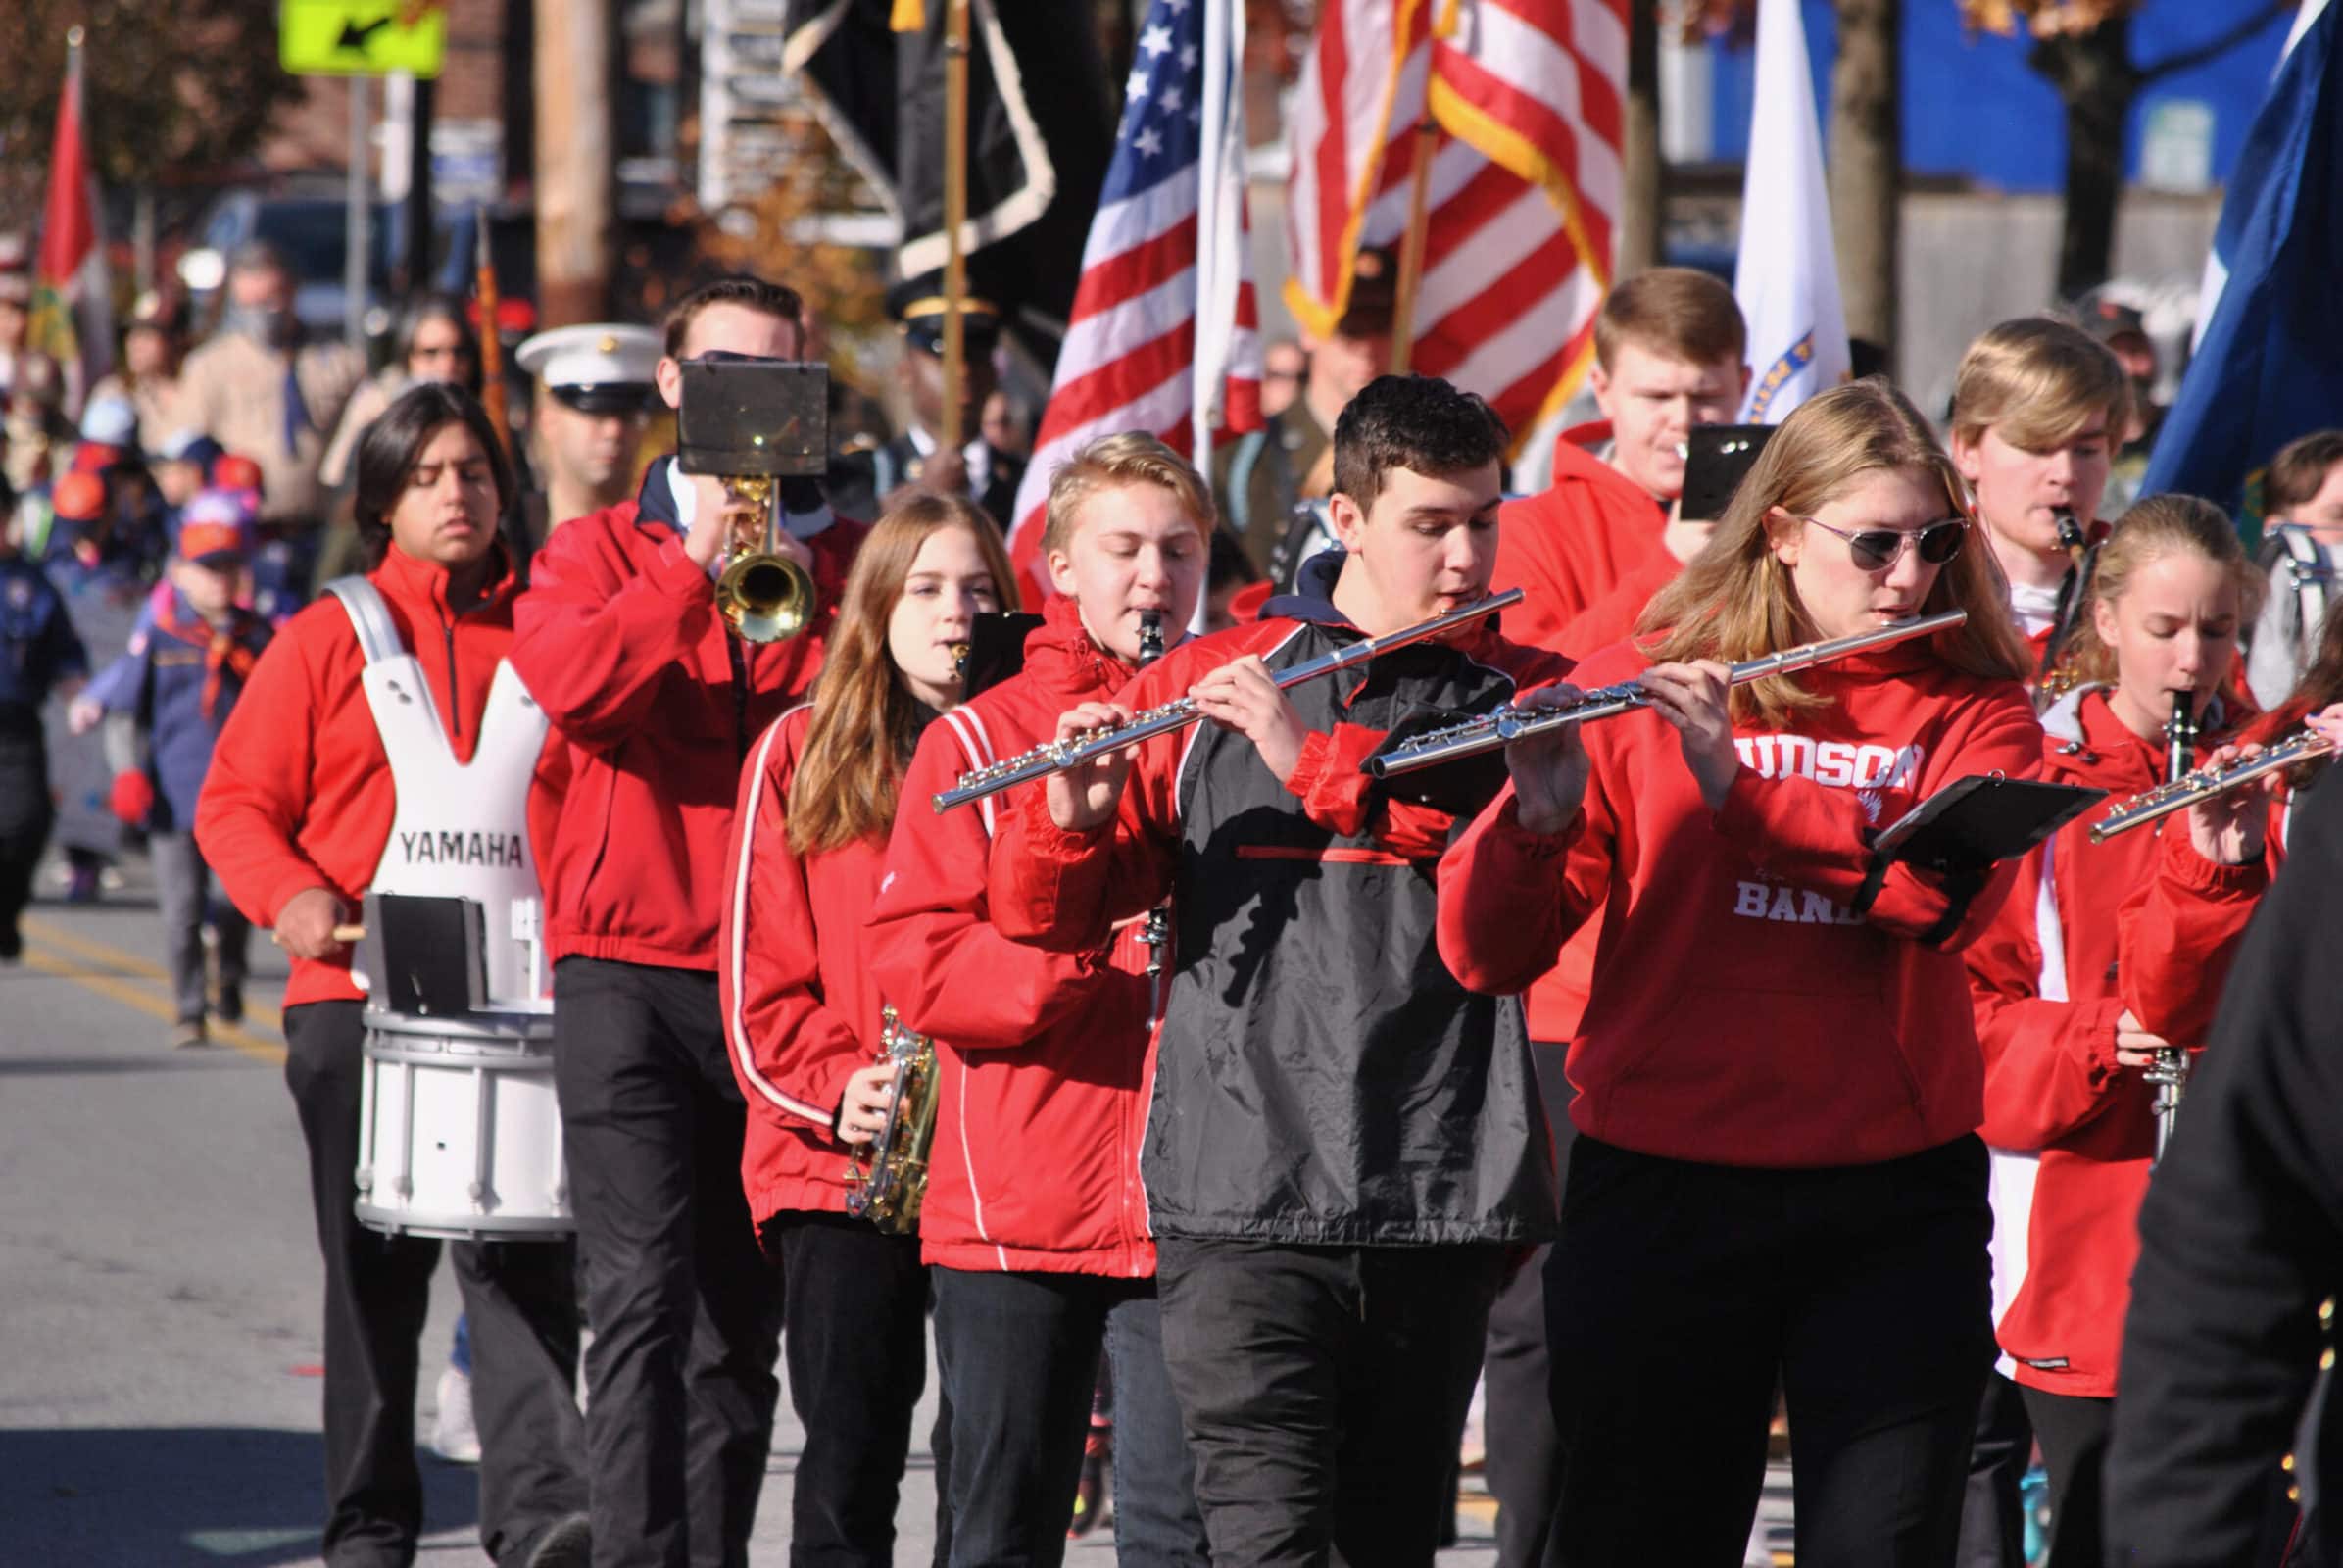 Students in a marching band wearing red jackets. Some carrying American flags.